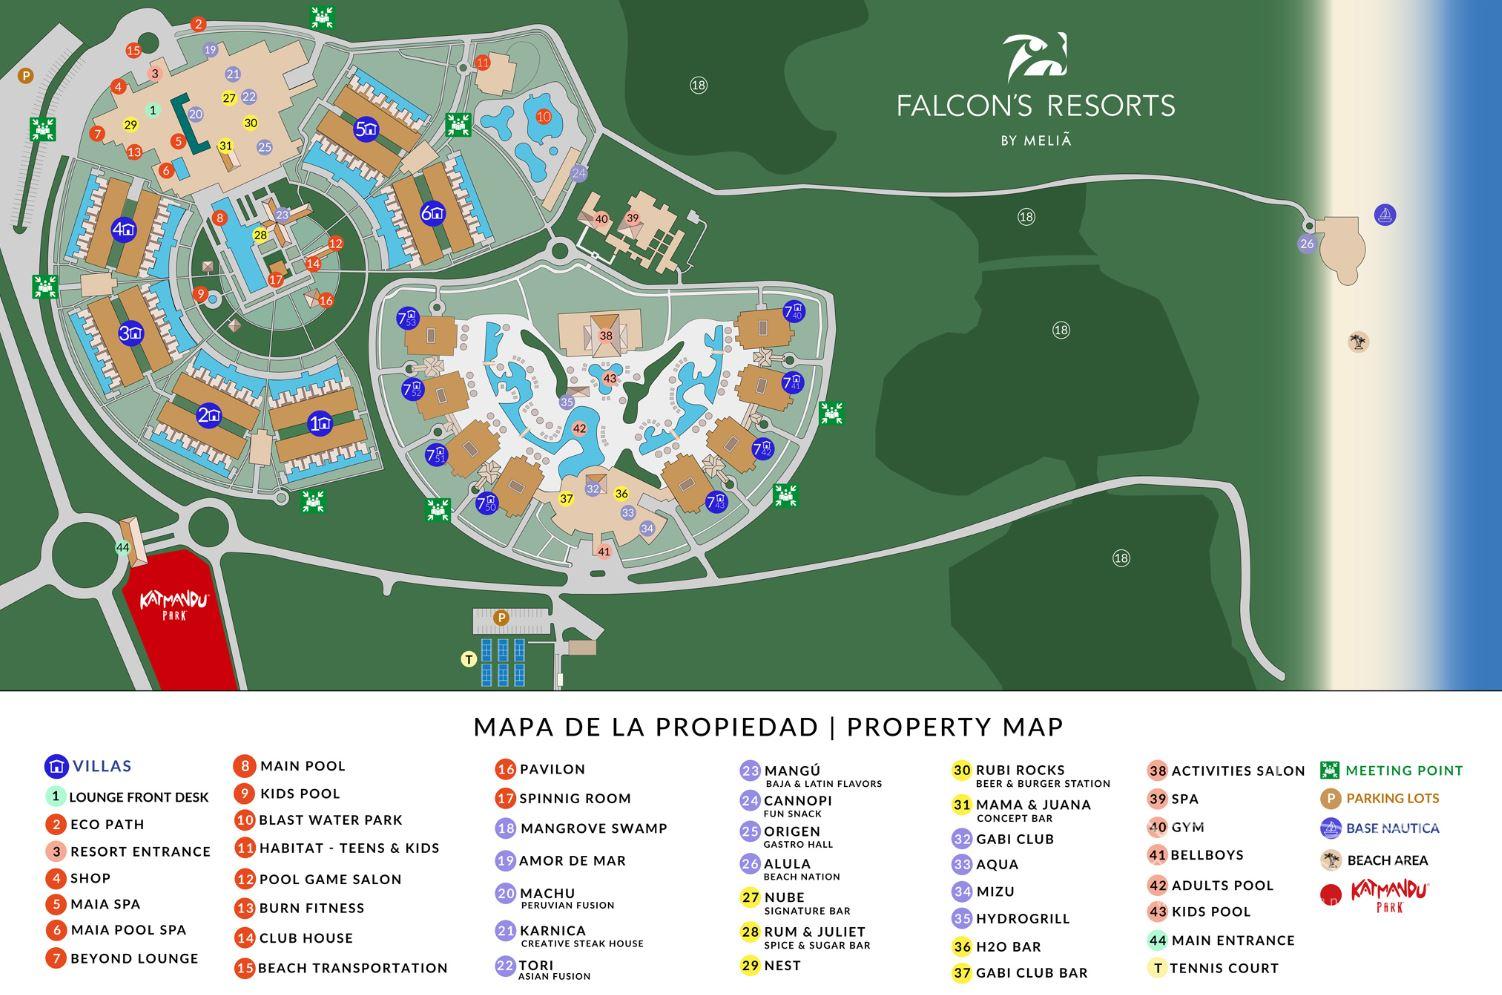 Falcon's Resort All Suites formerly Paradisus